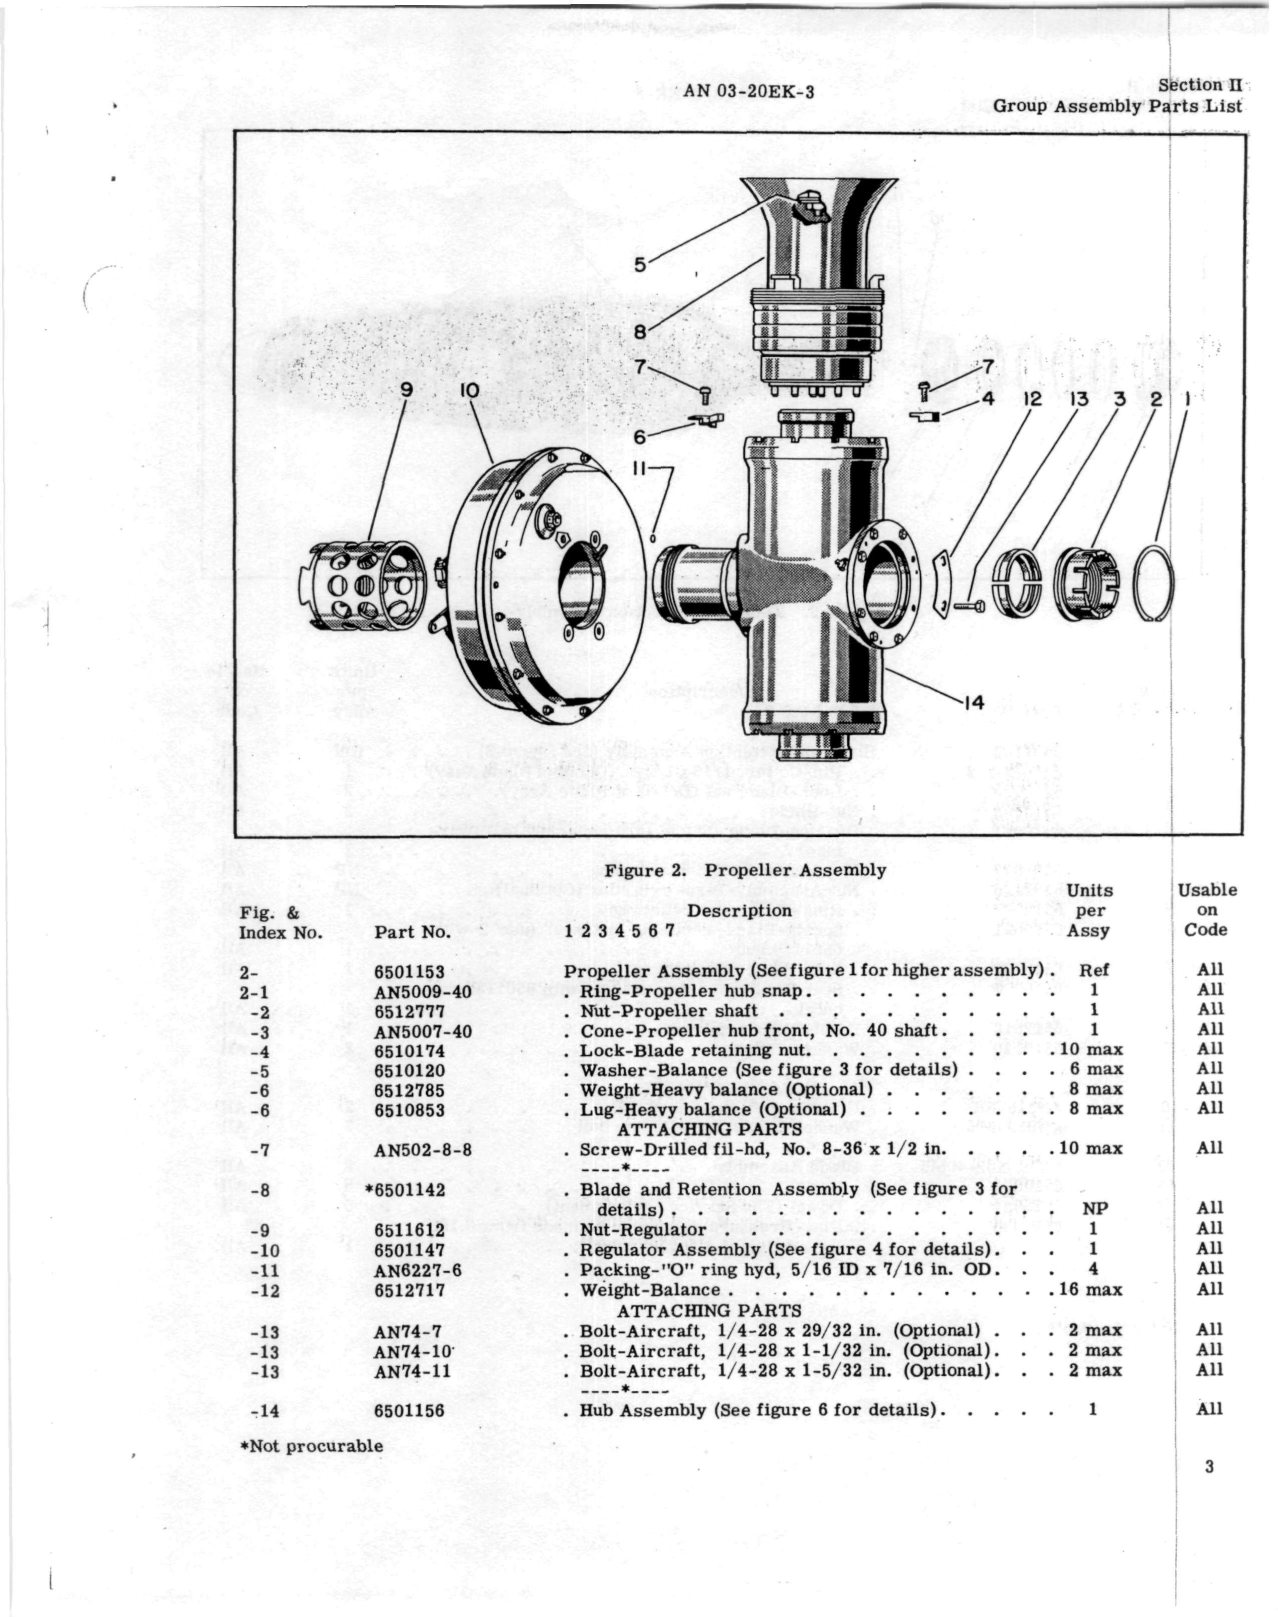 Sample page 5 from AirCorps Library document: Hydraulic Propeller Illustrated Parts Breakdown Model A422-E1